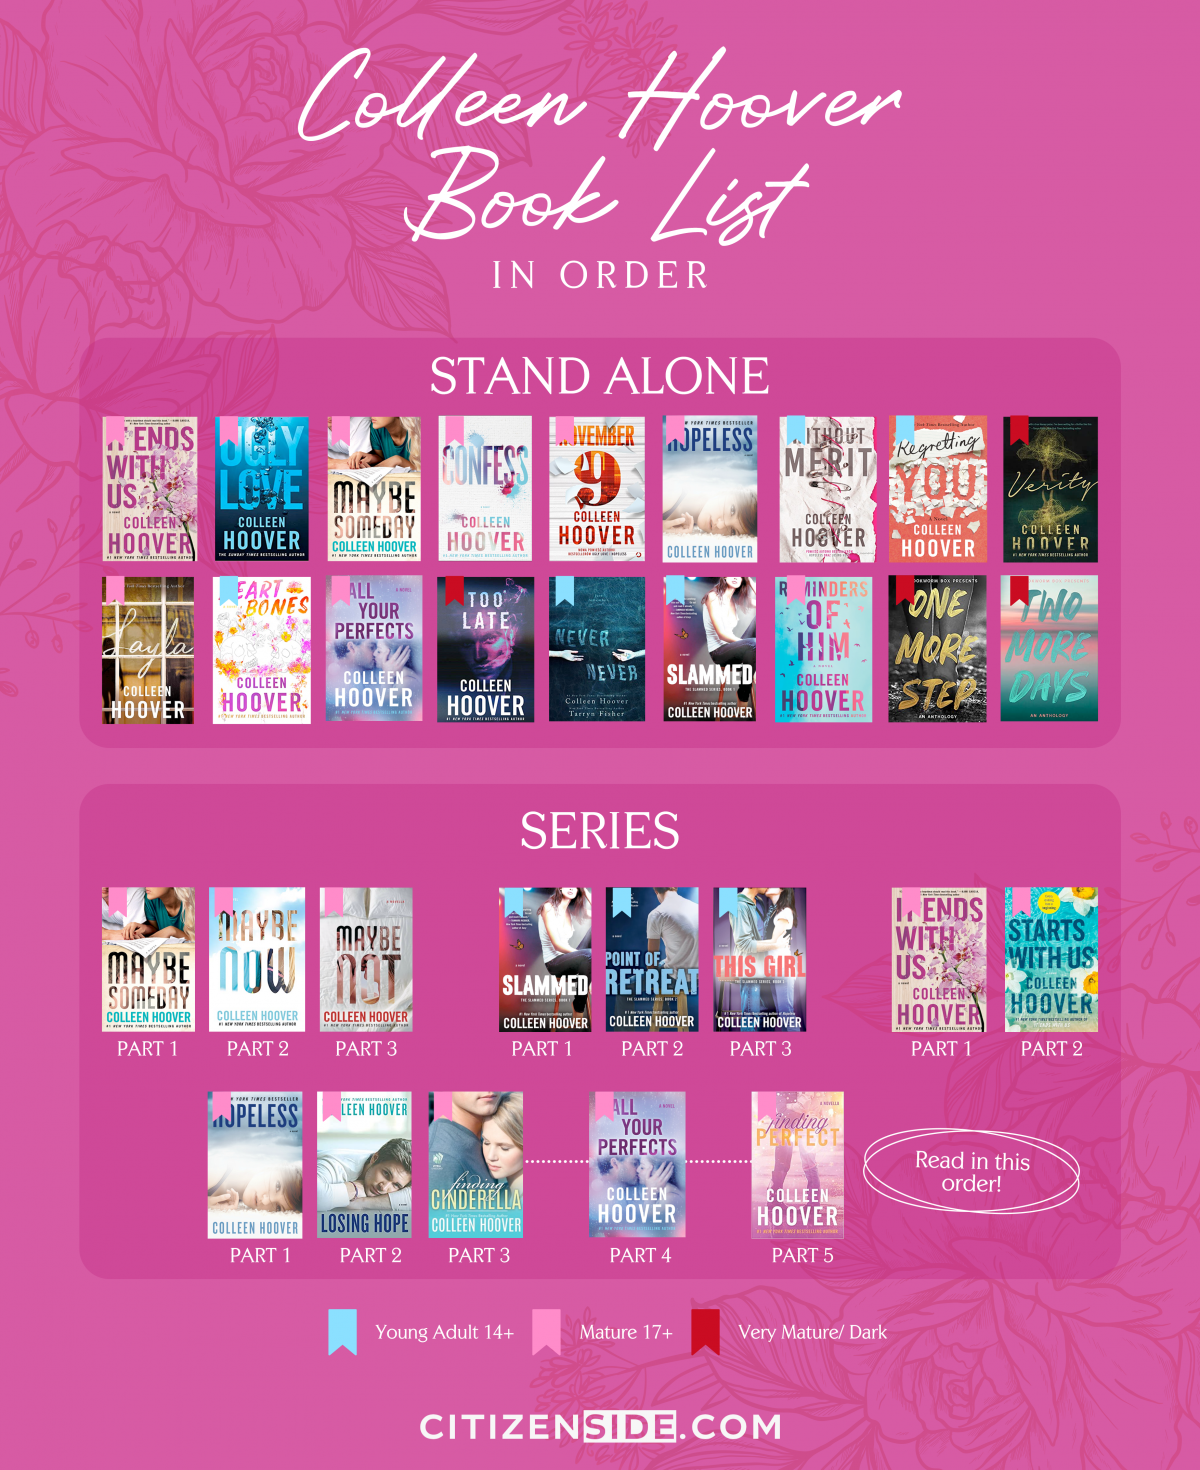 Colleen Hoover Book List in Order